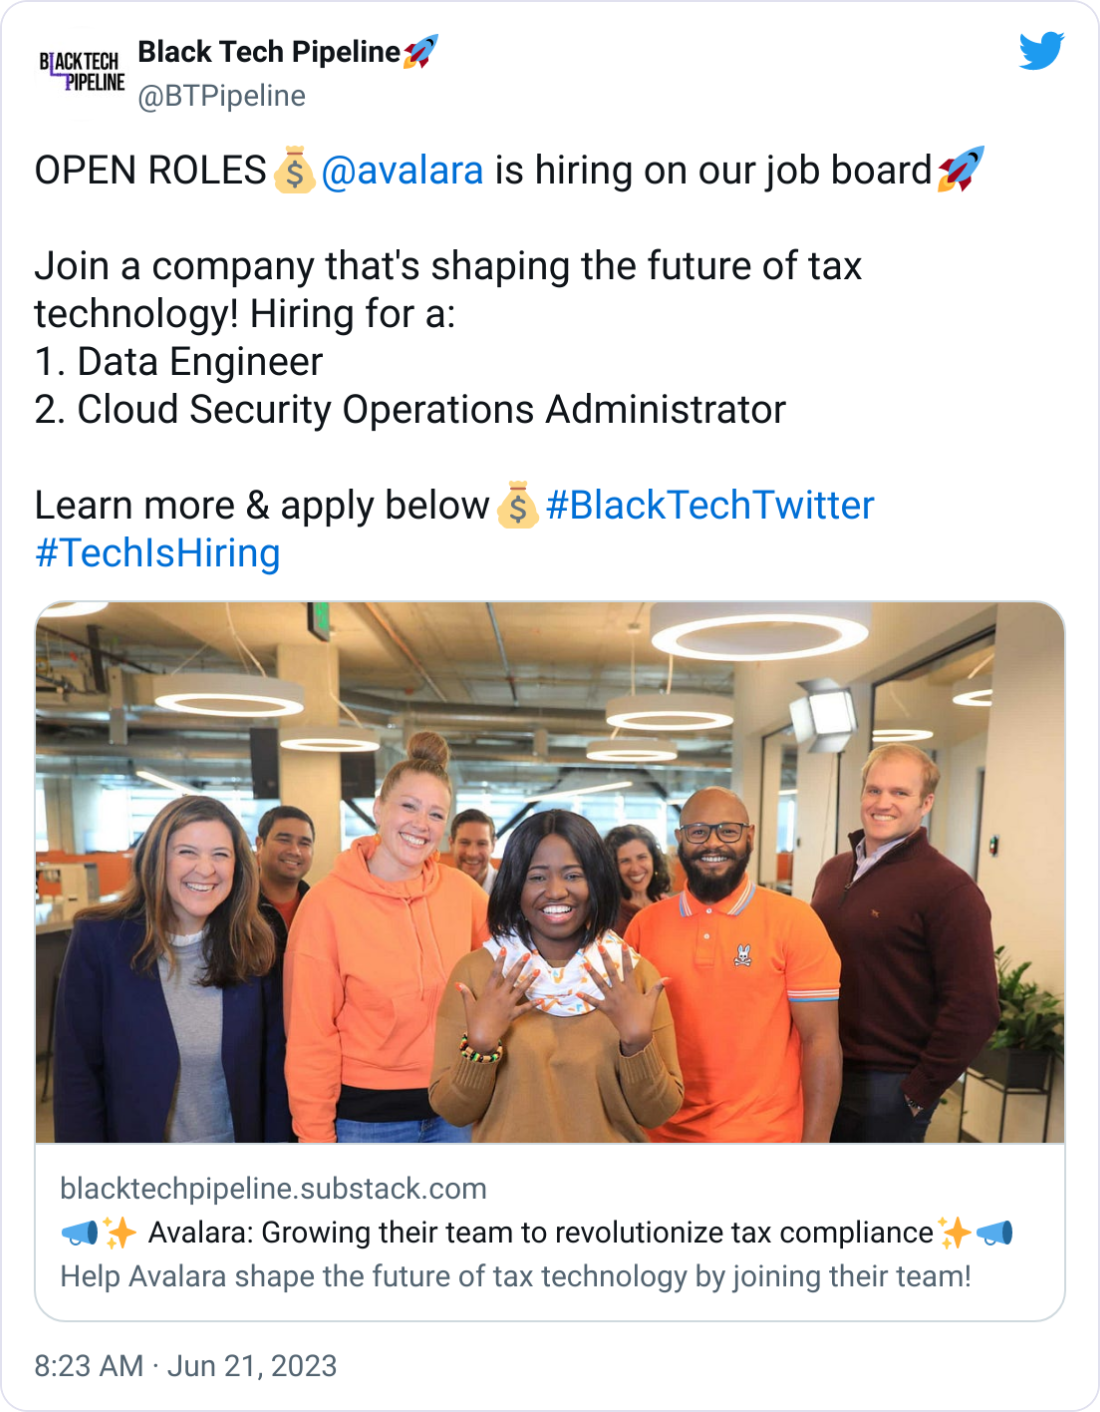 Black Tech Pipeline🚀 @BTPipeline OPEN ROLES💰 @avalara  is hiring on our job board🚀  Join a company that's shaping the future of tax technology! Hiring for a: 1. Data Engineer 2. Cloud Security Operations Administrator  Learn more & apply below💰#BlackTechTwitter #TechIsHiring https://blacktechpipeline.substack.com/p/avalara-growing-their-team-to-revolutionize